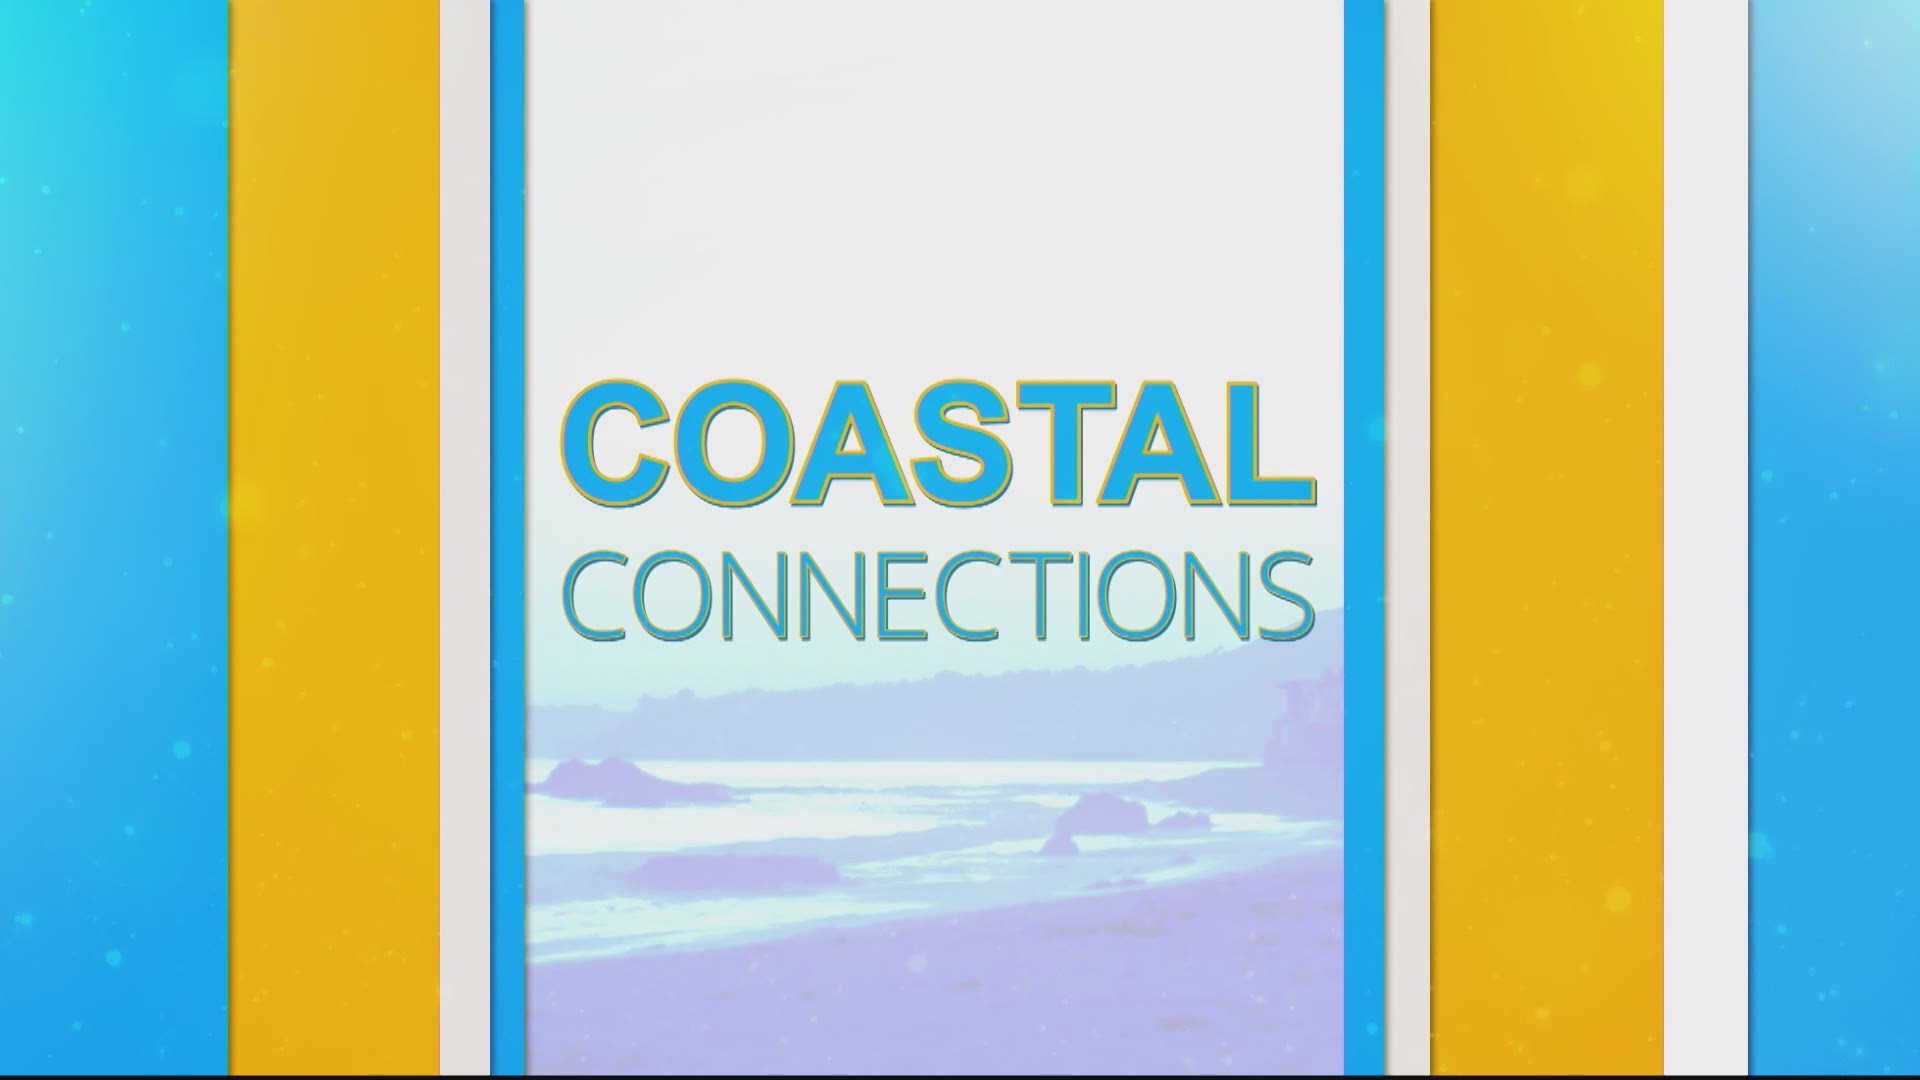 Join us for another edition of Coastal Connections